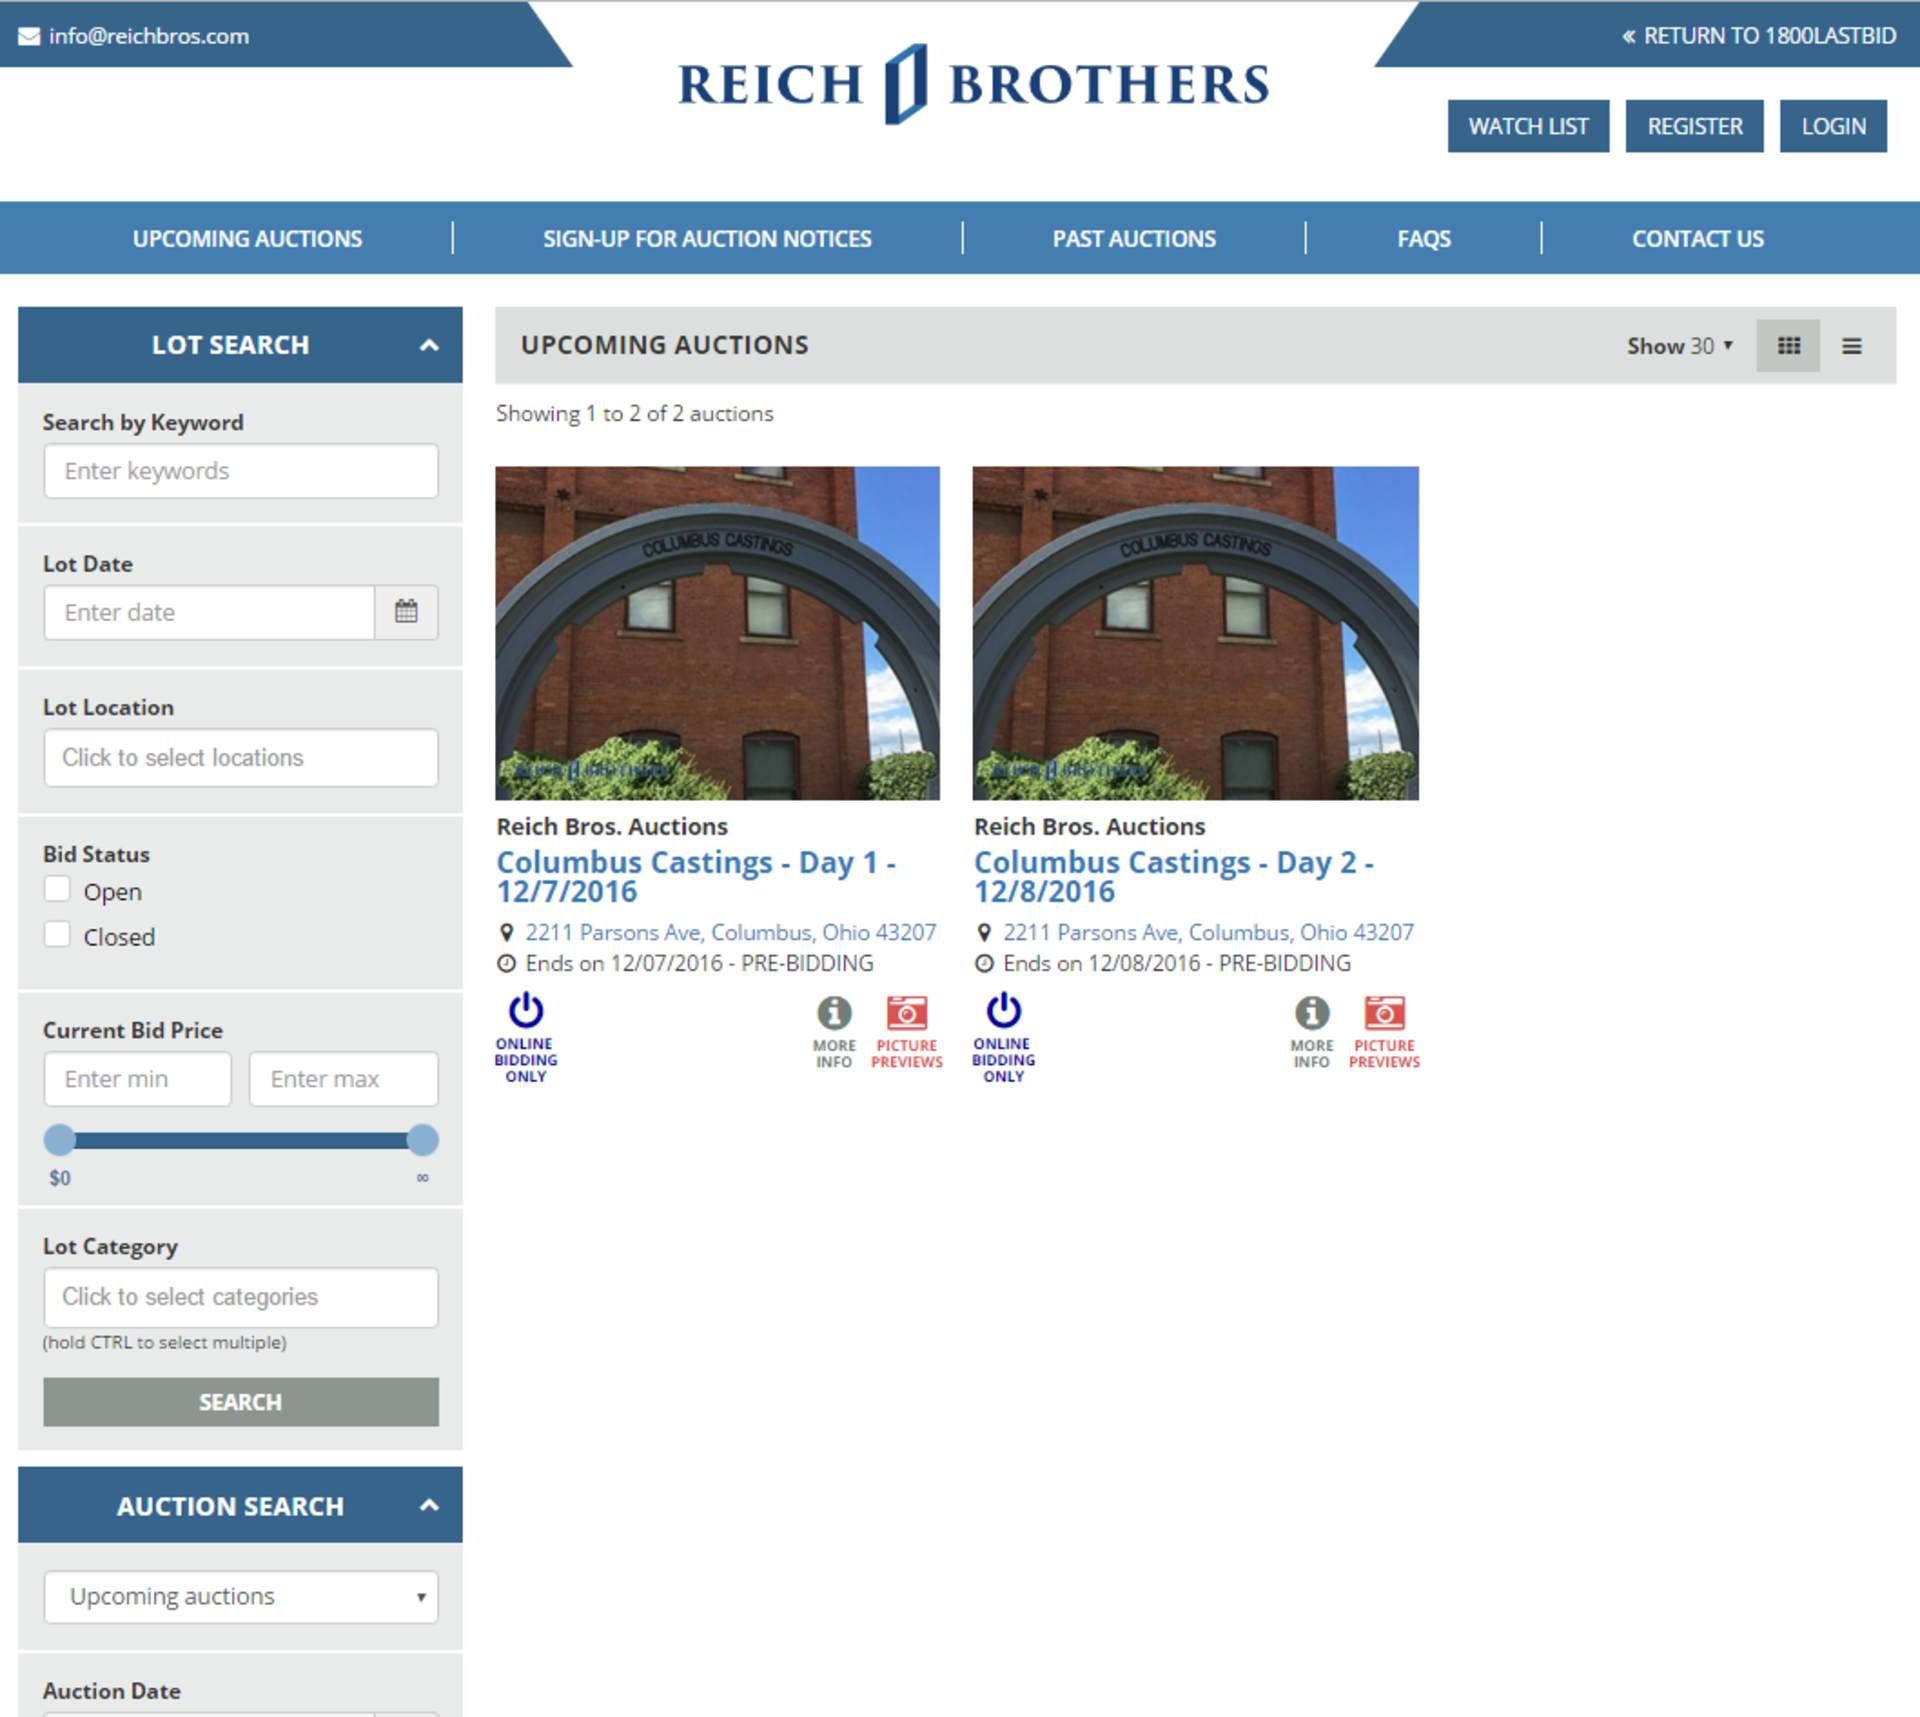 ***** THIS AUCTION IS BEING CONDUCTED ON THE REICH BROTHERS' WEBSITE *****